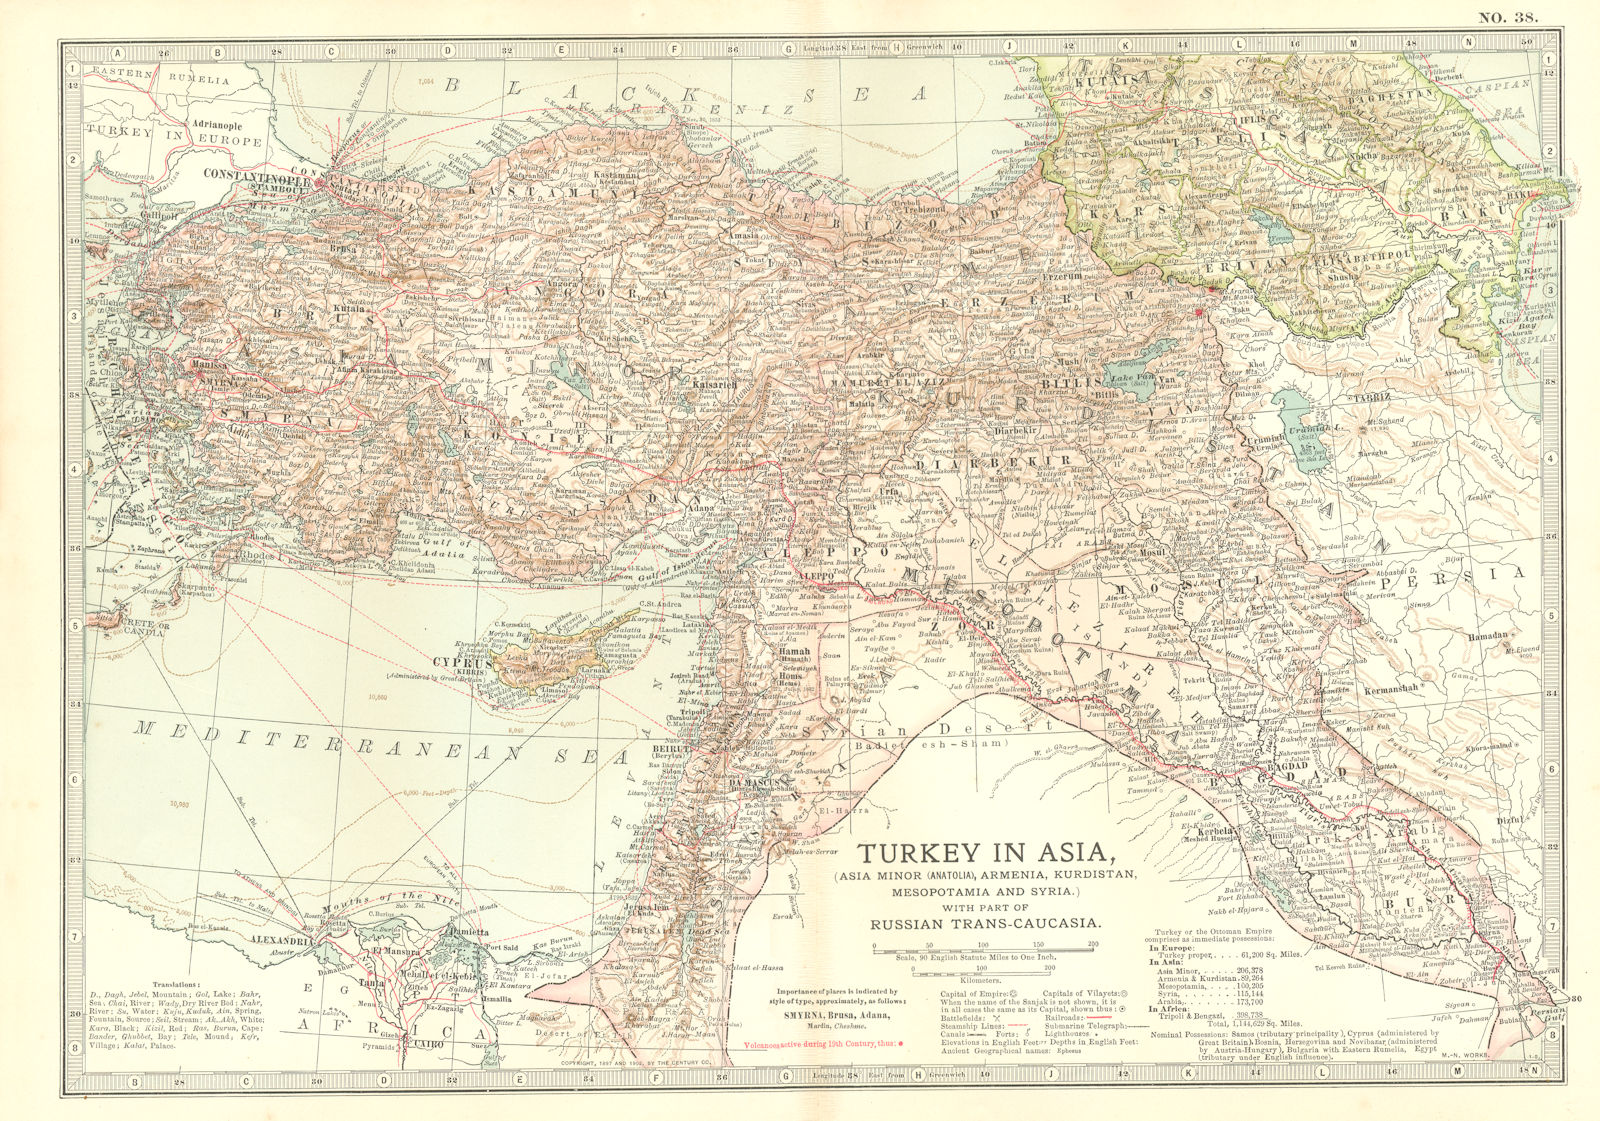 Associate Product TURKEY ASIA.shows Russo-Turkish wars battles/dates 1828/9 1853 1877/8 1903 map